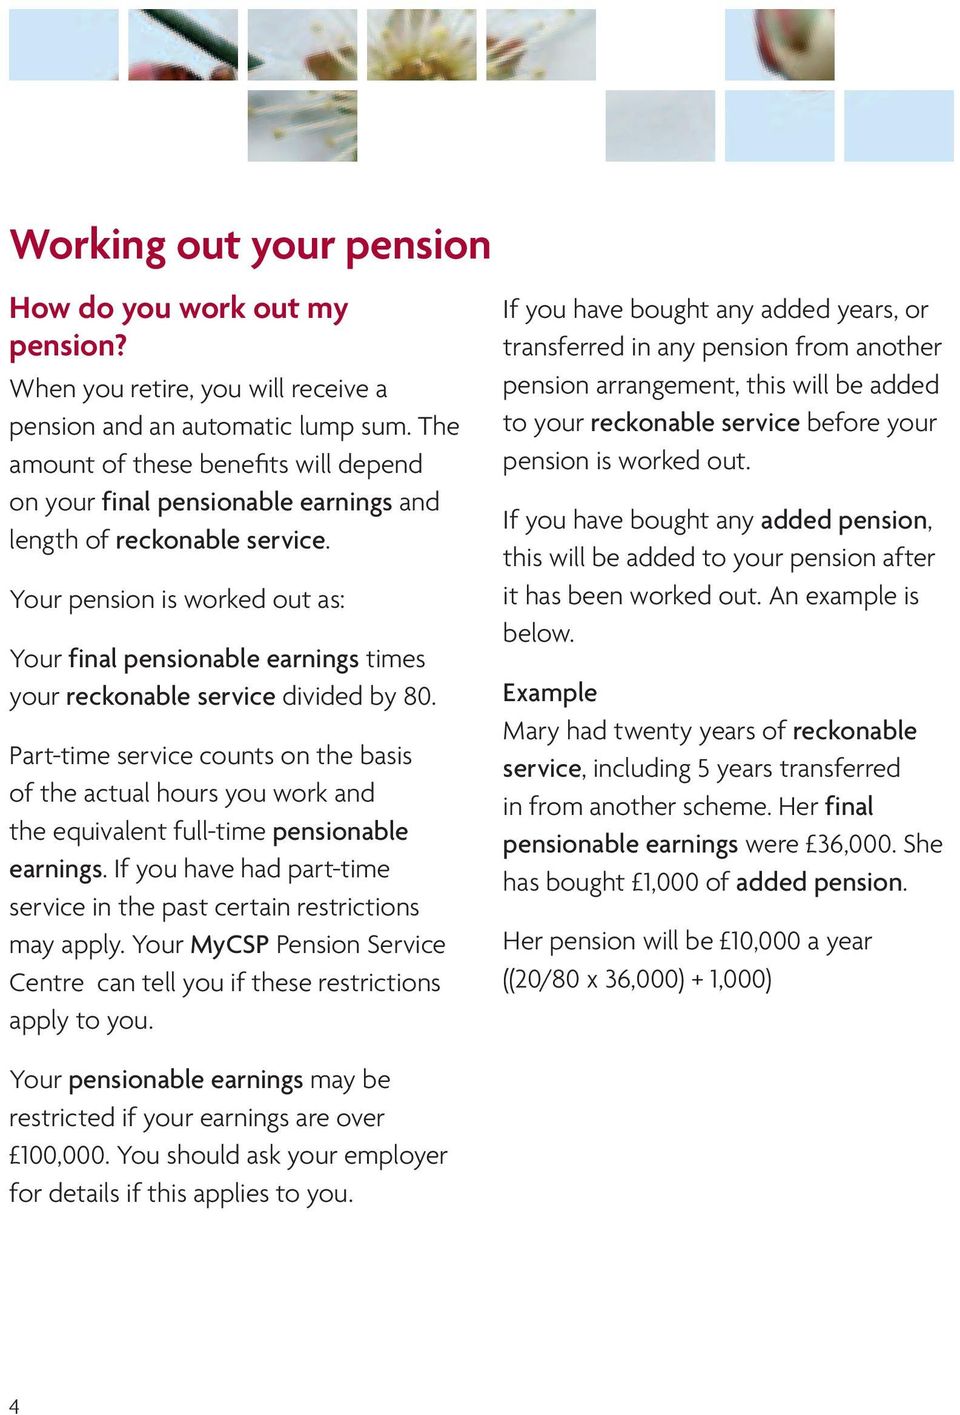 Your pension is worked out as: Your final pensionable earnings times your reckonable service divided by 80.